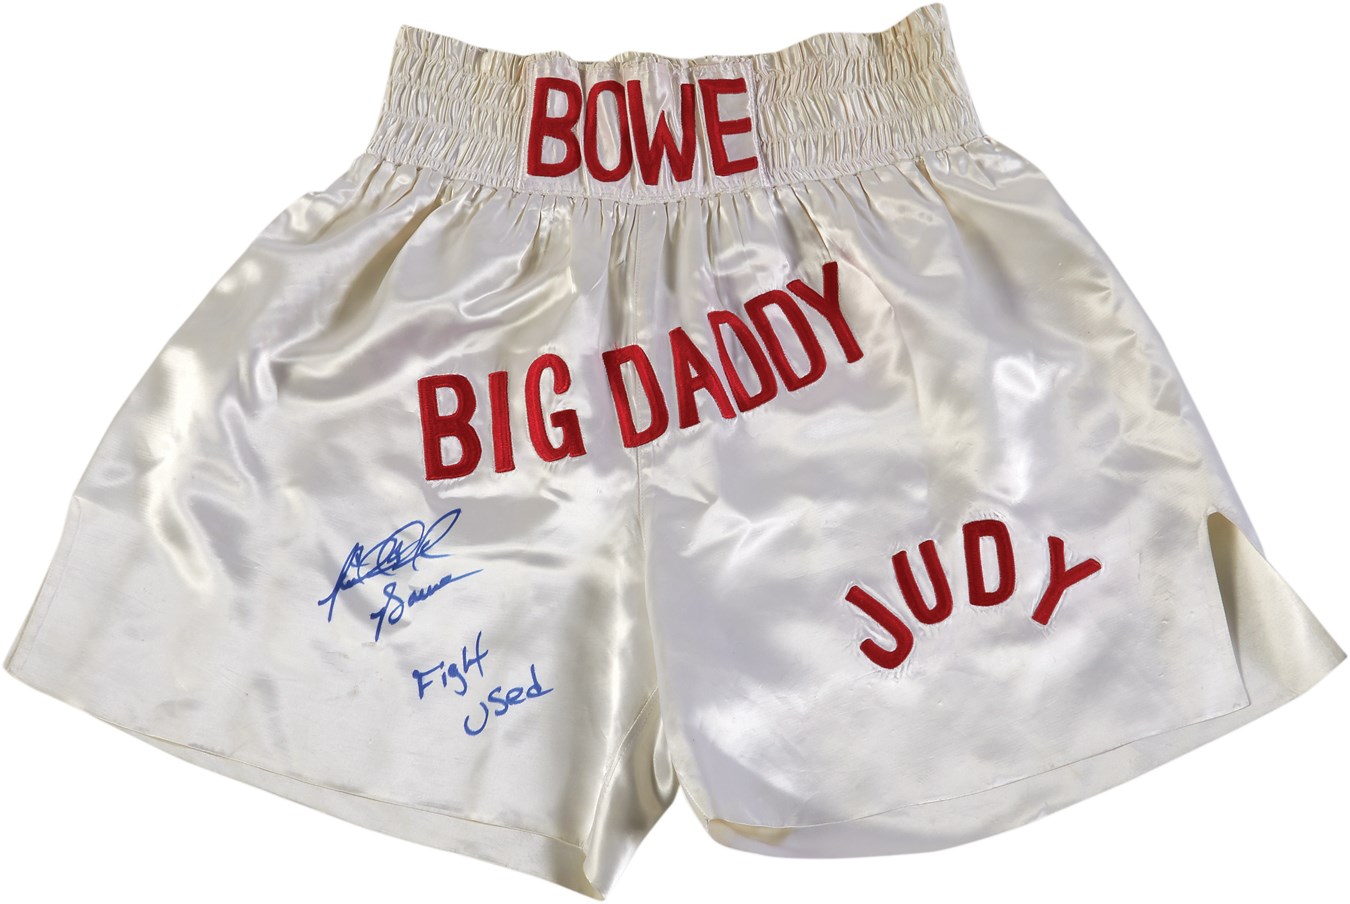 1996 Riddick Bowe Fight Worn Trunks from Andrew Golota I Match (Photomatched)